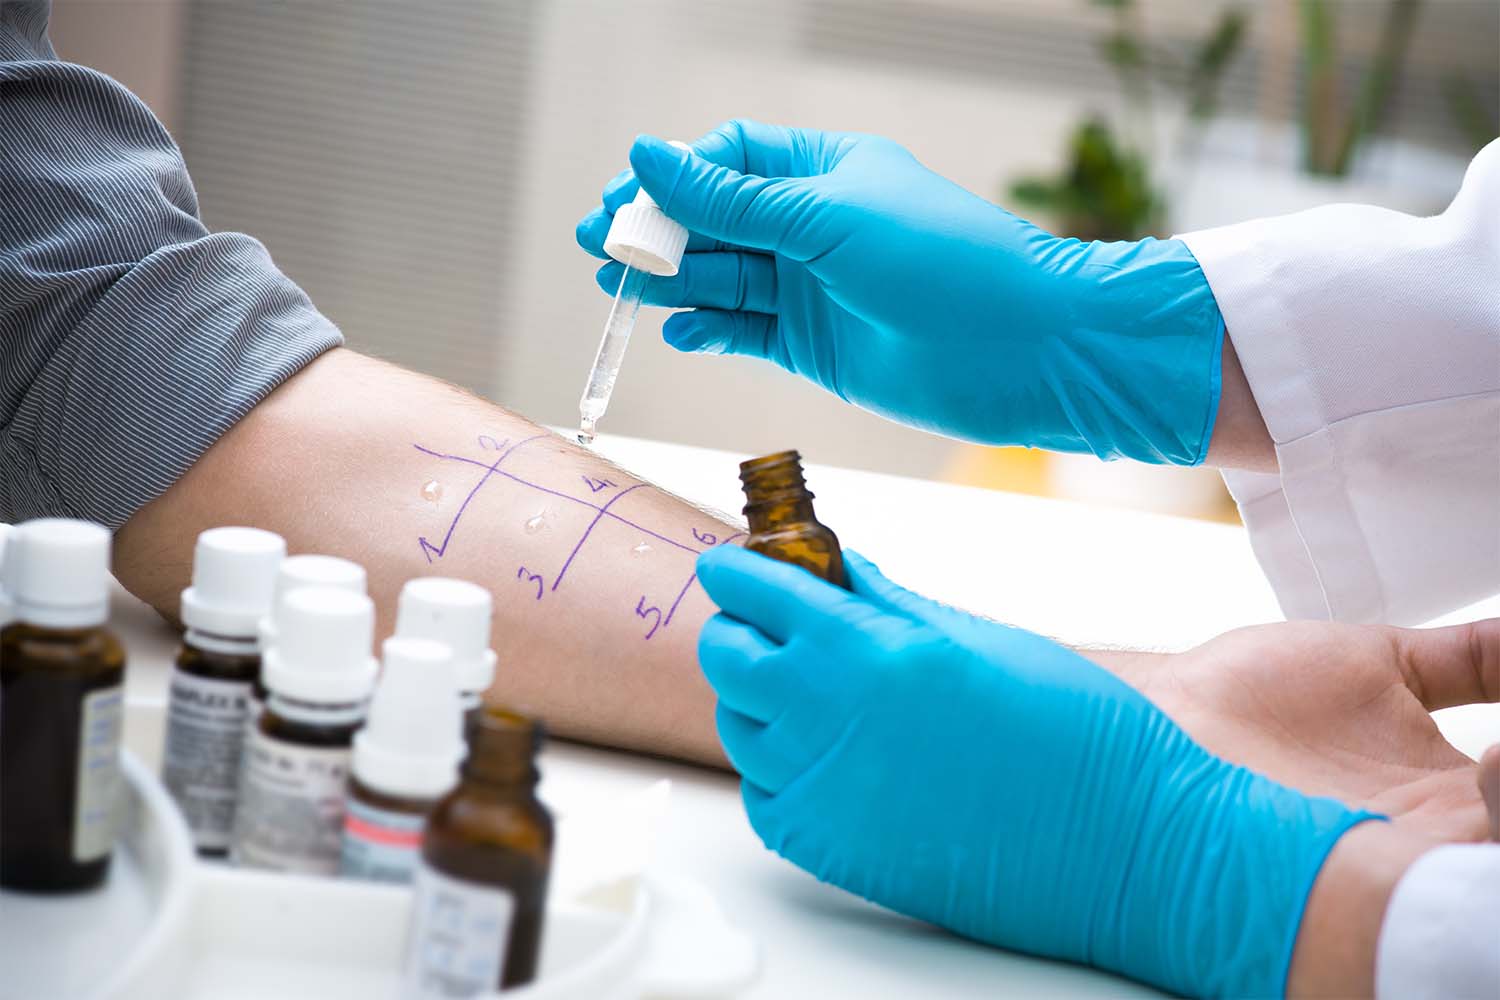 How Much Does Allergy Testing Cost Without Insurance?